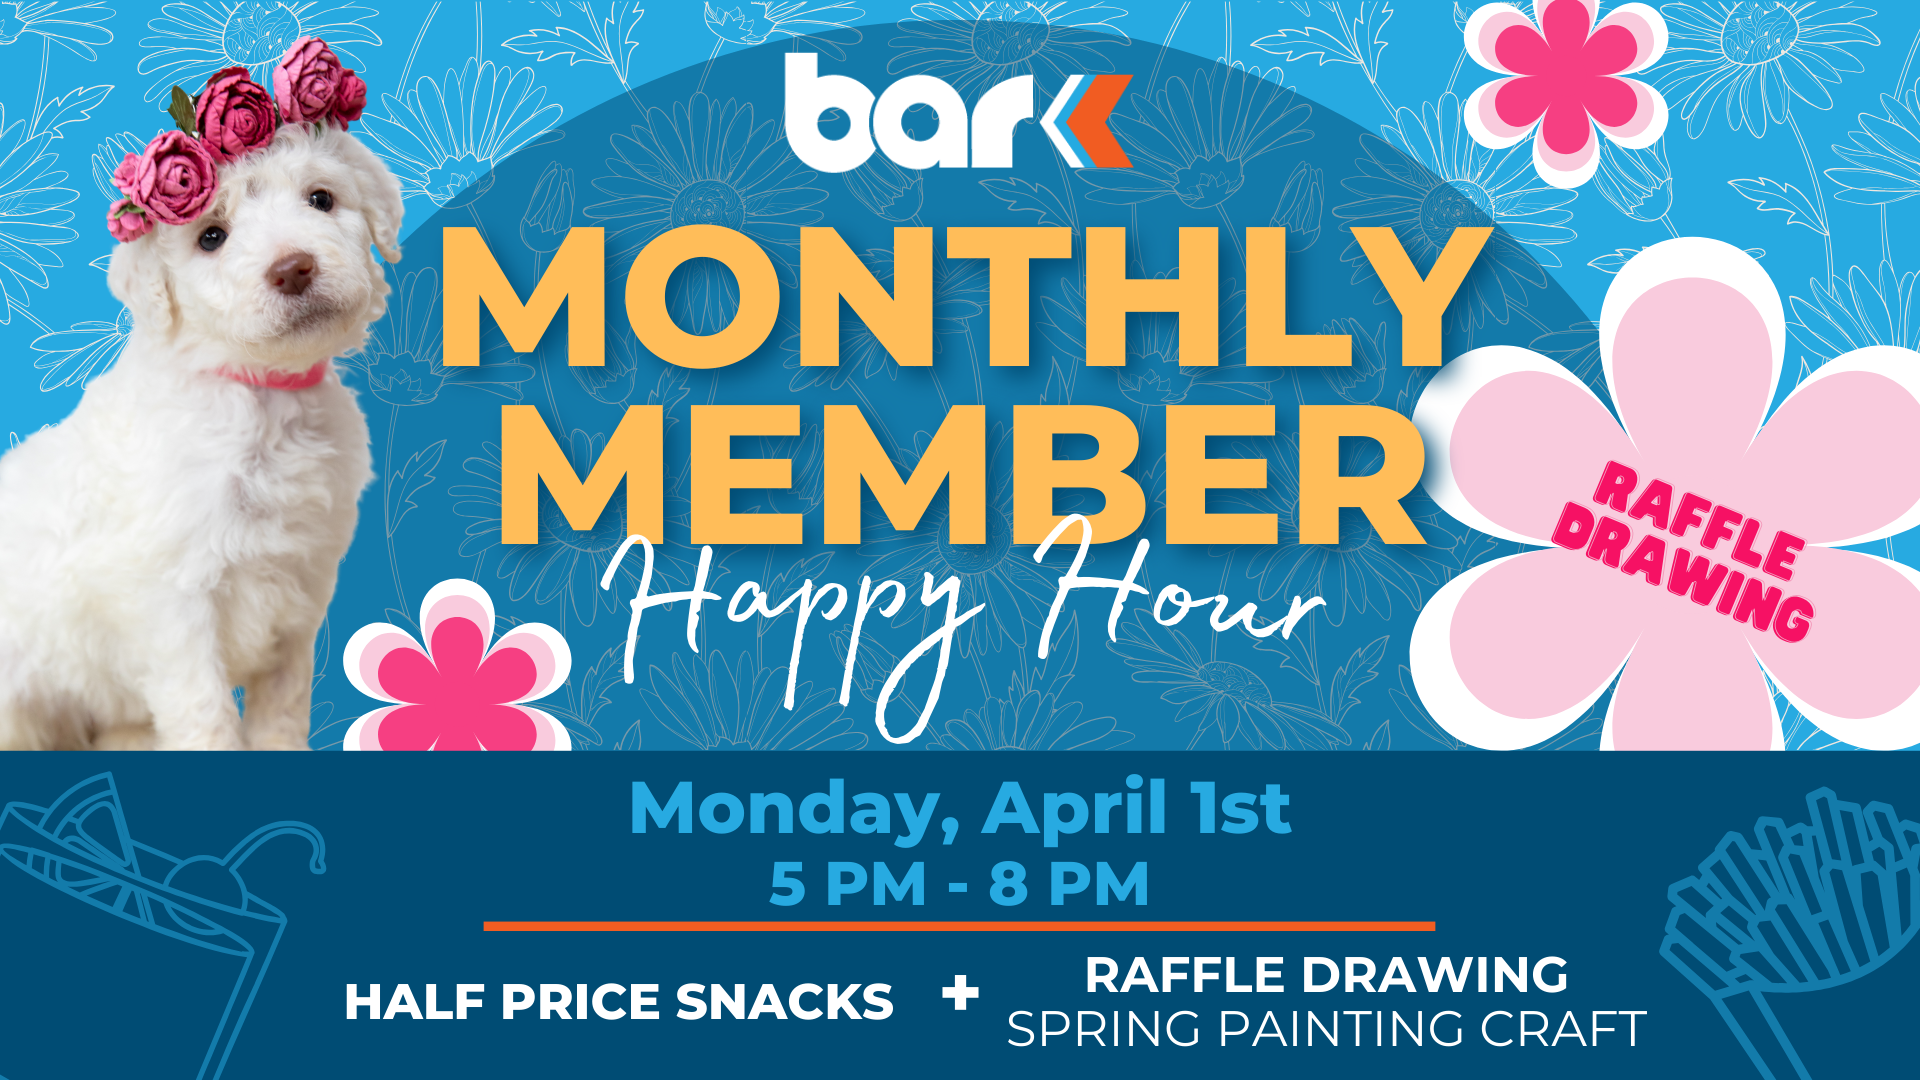 Bar K Monthly Member happy hour. Raffle drawing, spring painting craft, and half price snacks. Monday, April 1st from 5 pm to 8pm.